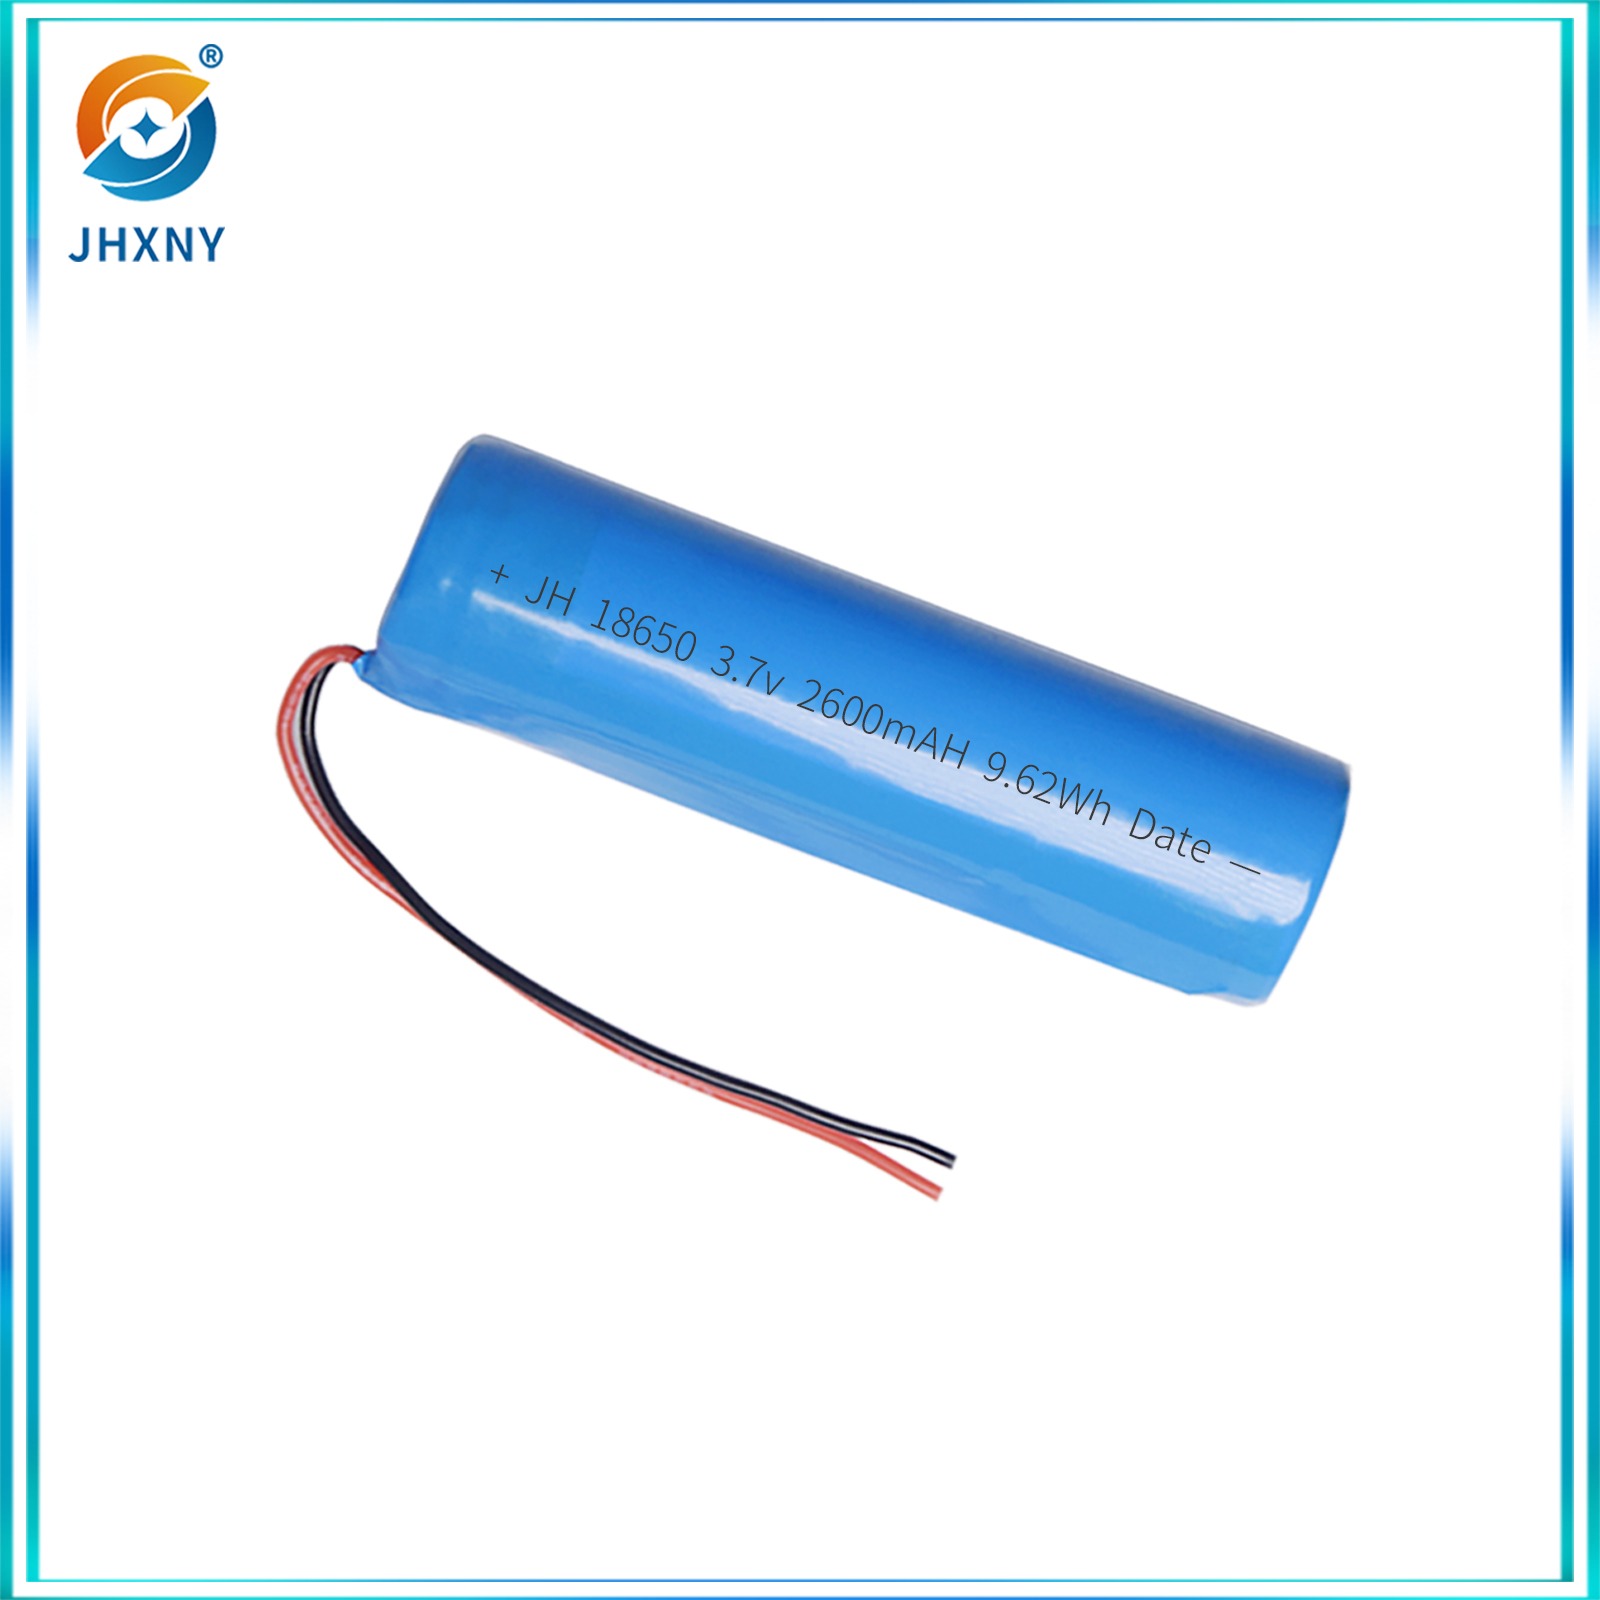 JH18650 3.7V2600mAh Cylinder type Lithium battery beauty instrument Sprayer Heating stick Gaming controller Wireless Keymouse